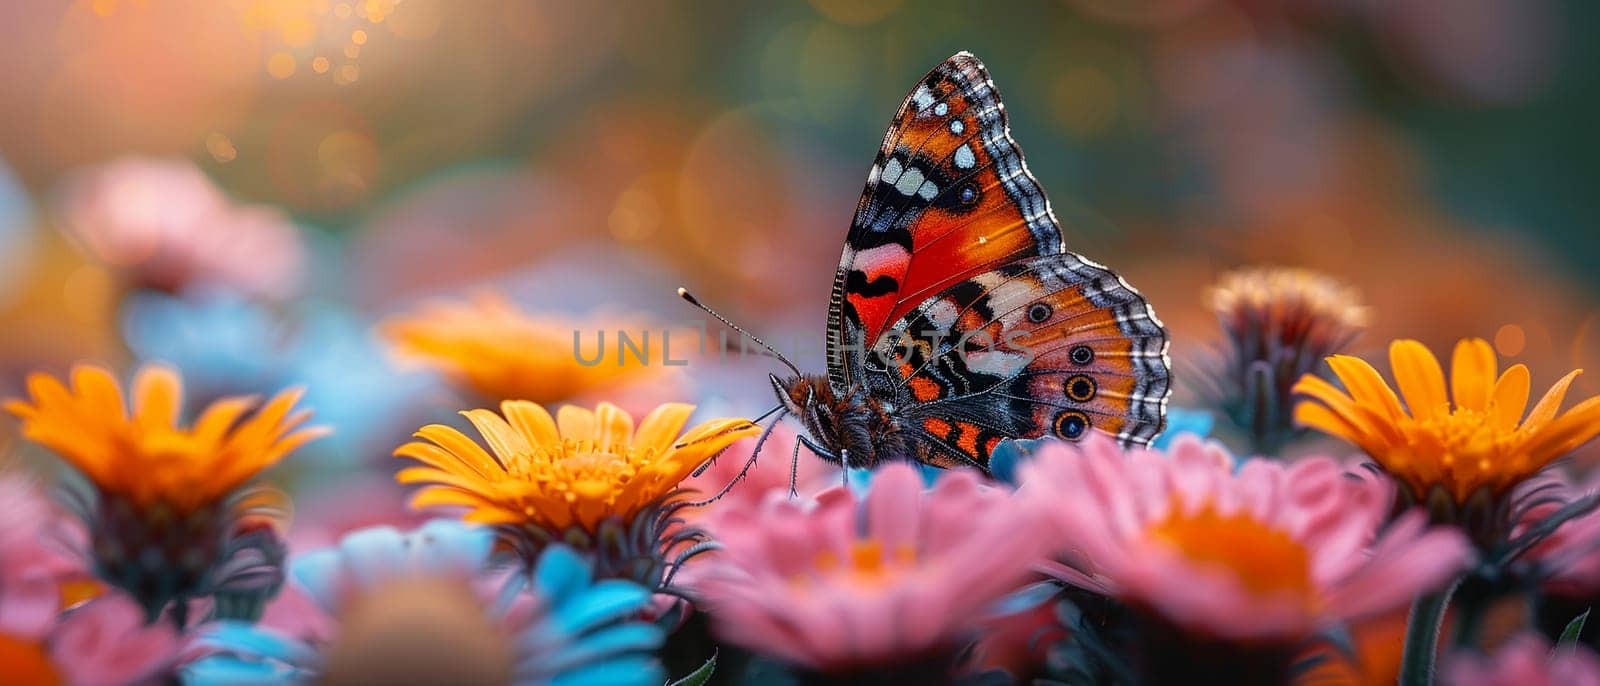 Macro shot of butterfly on wildflower, representing transformation and beauty.